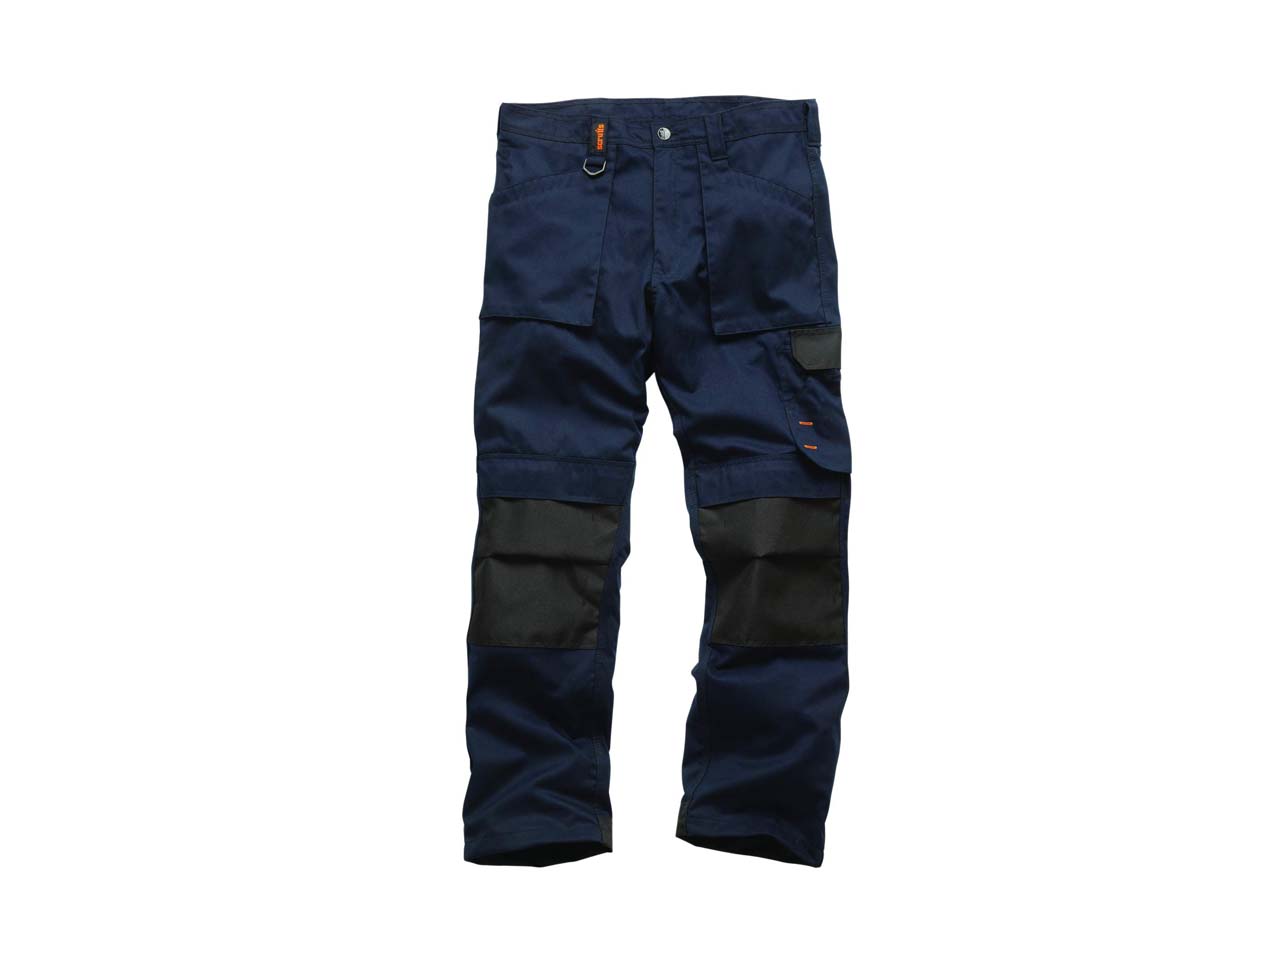 Dunlop On Site Trousers Mens Black/Charcoal Extra Sml : Amazon.co.uk:  Fashion